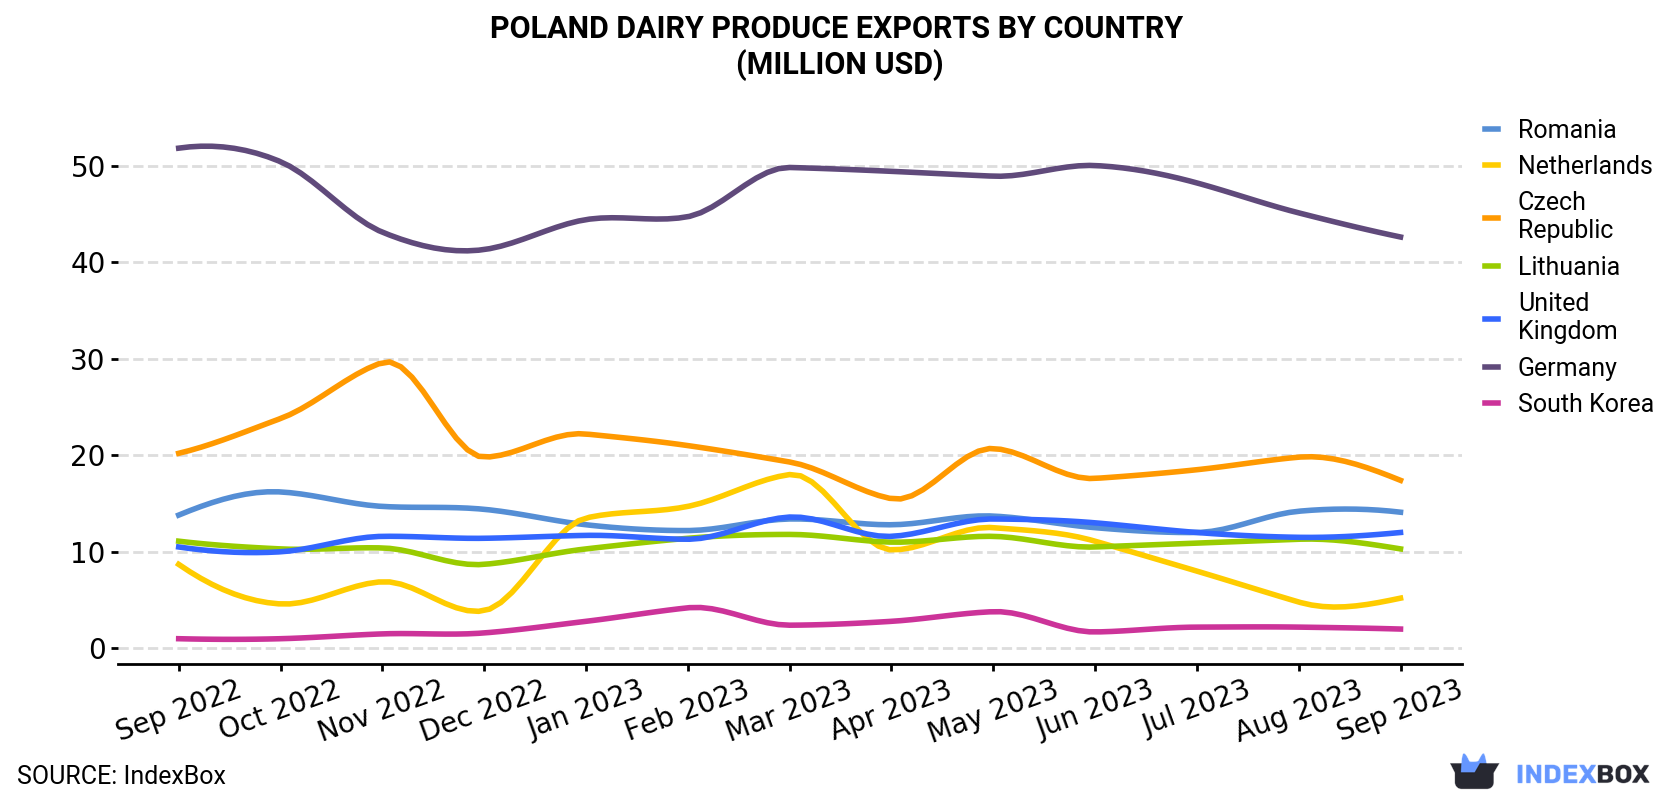 Poland Dairy Produce Exports By Country (Million USD)